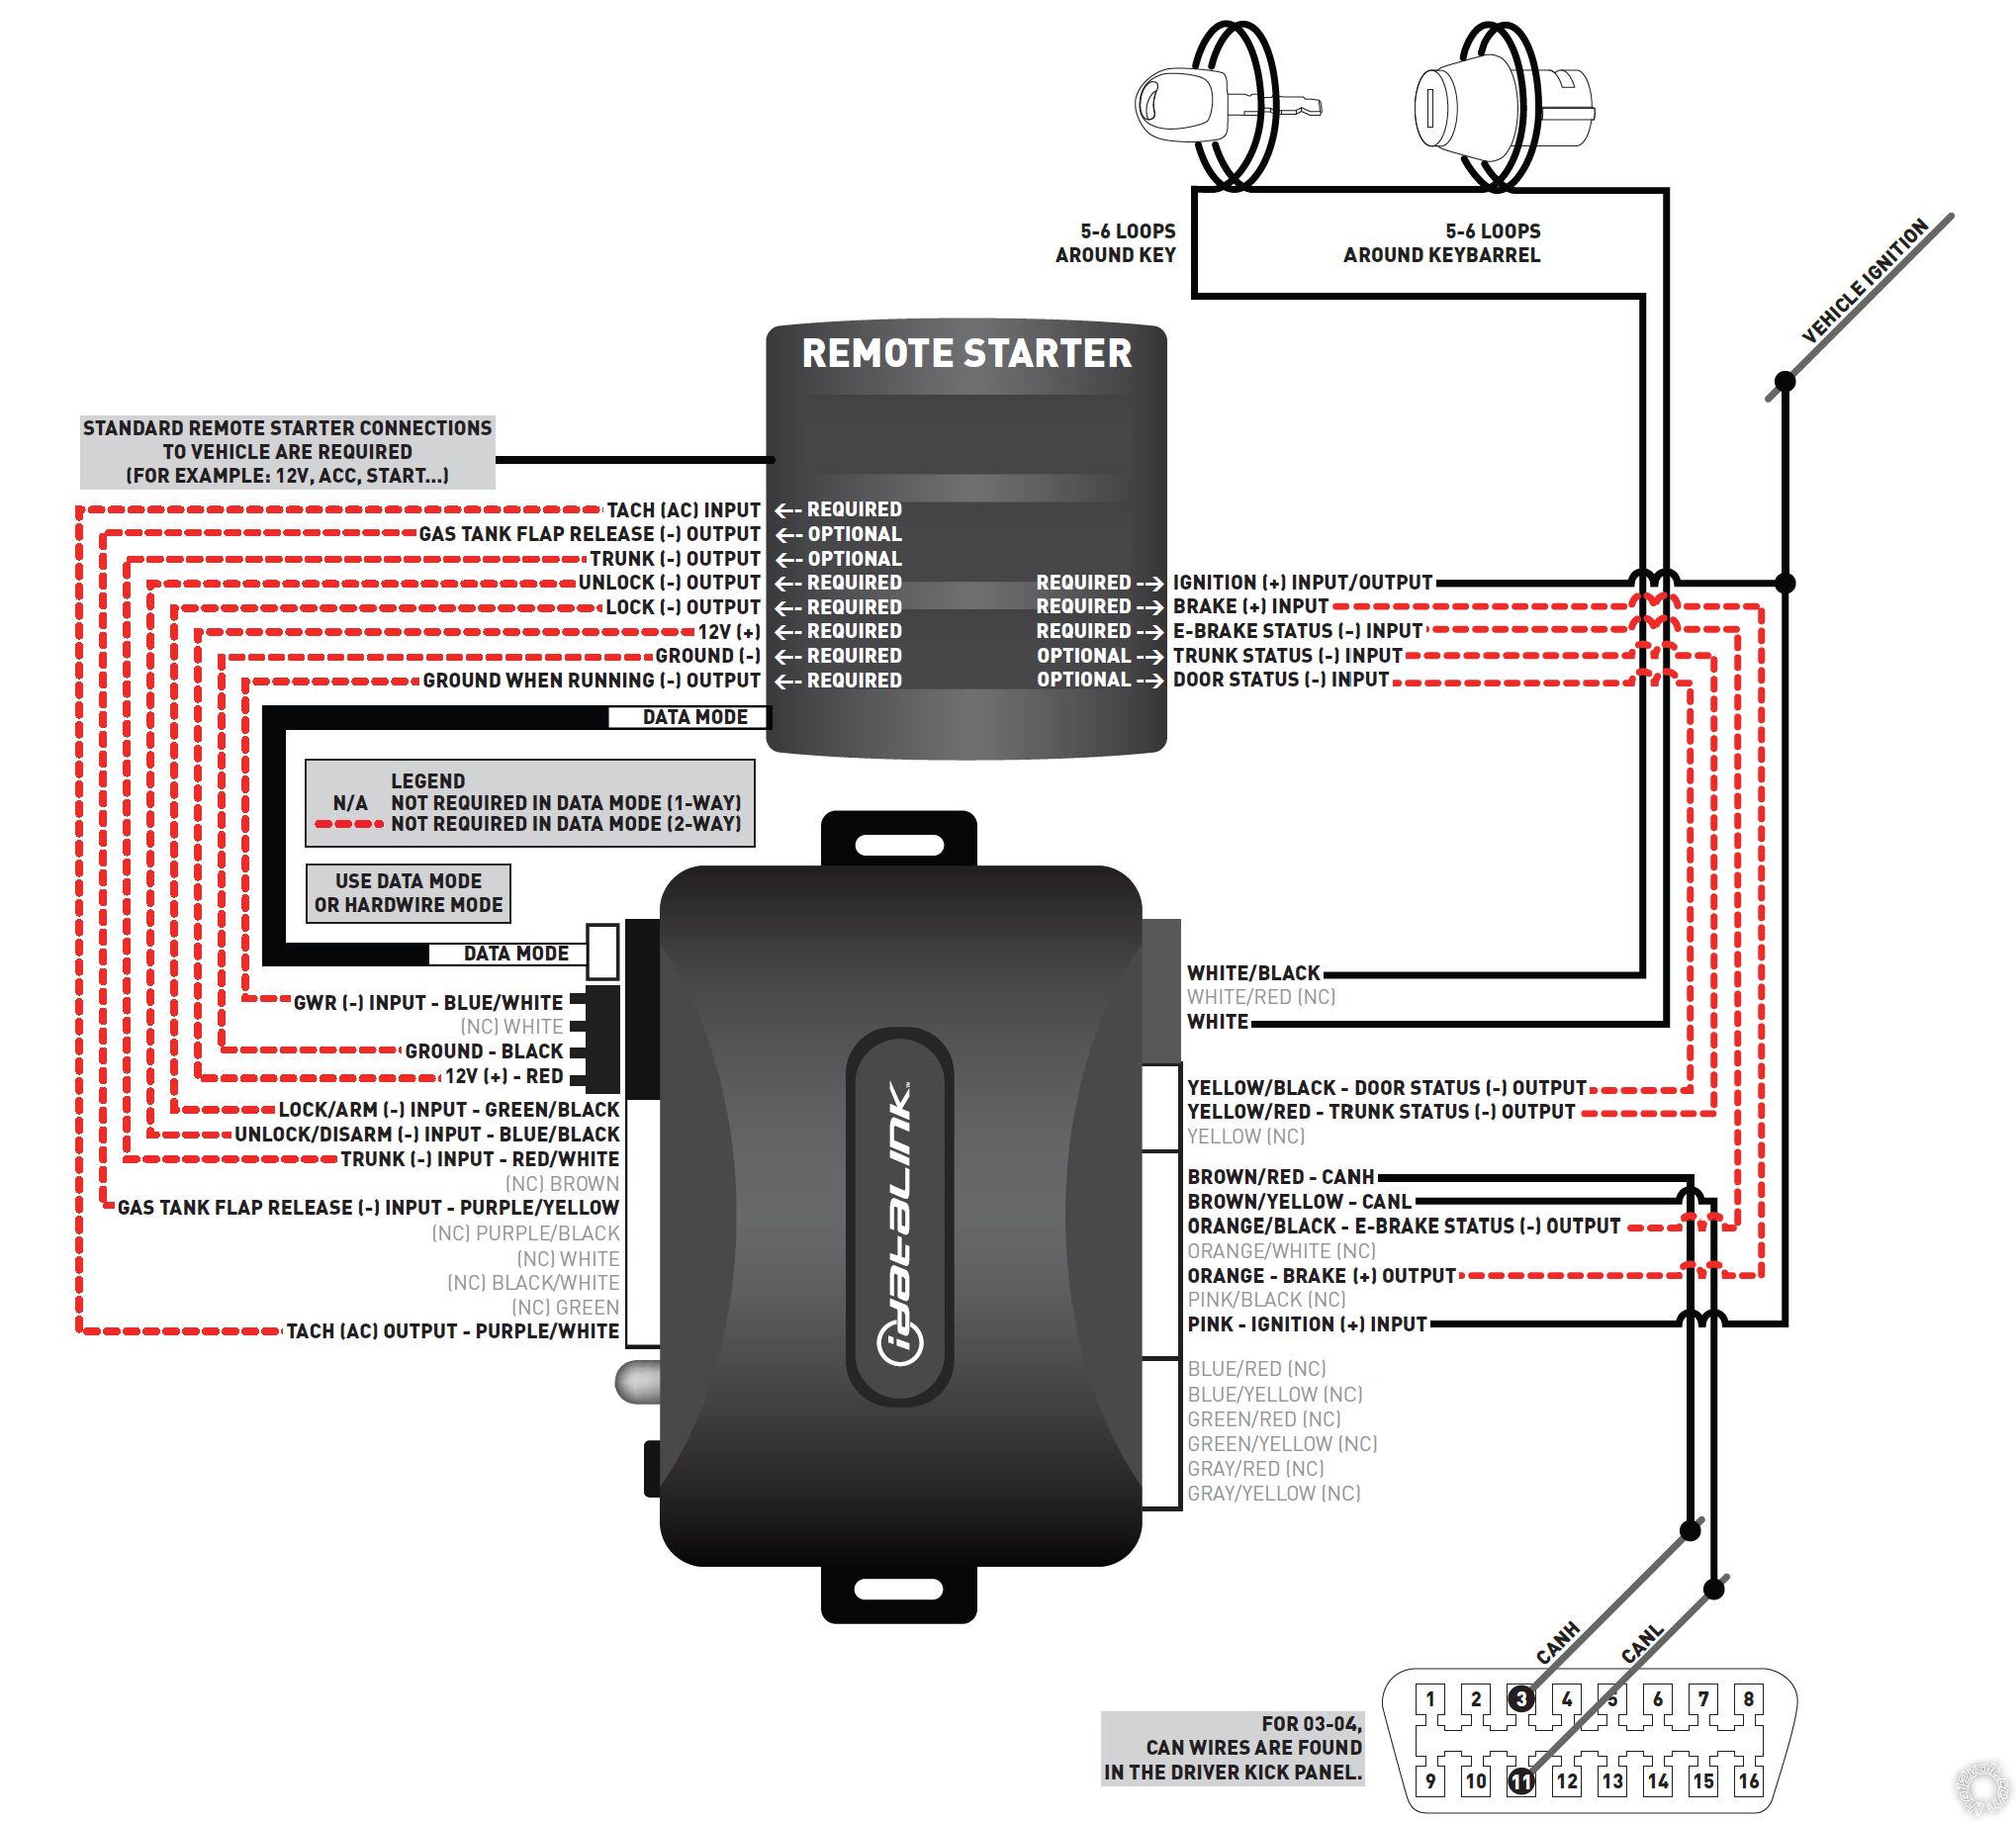 Spy LC095A Remote Starter, Volvo XC90 - Last Post -- posted image.